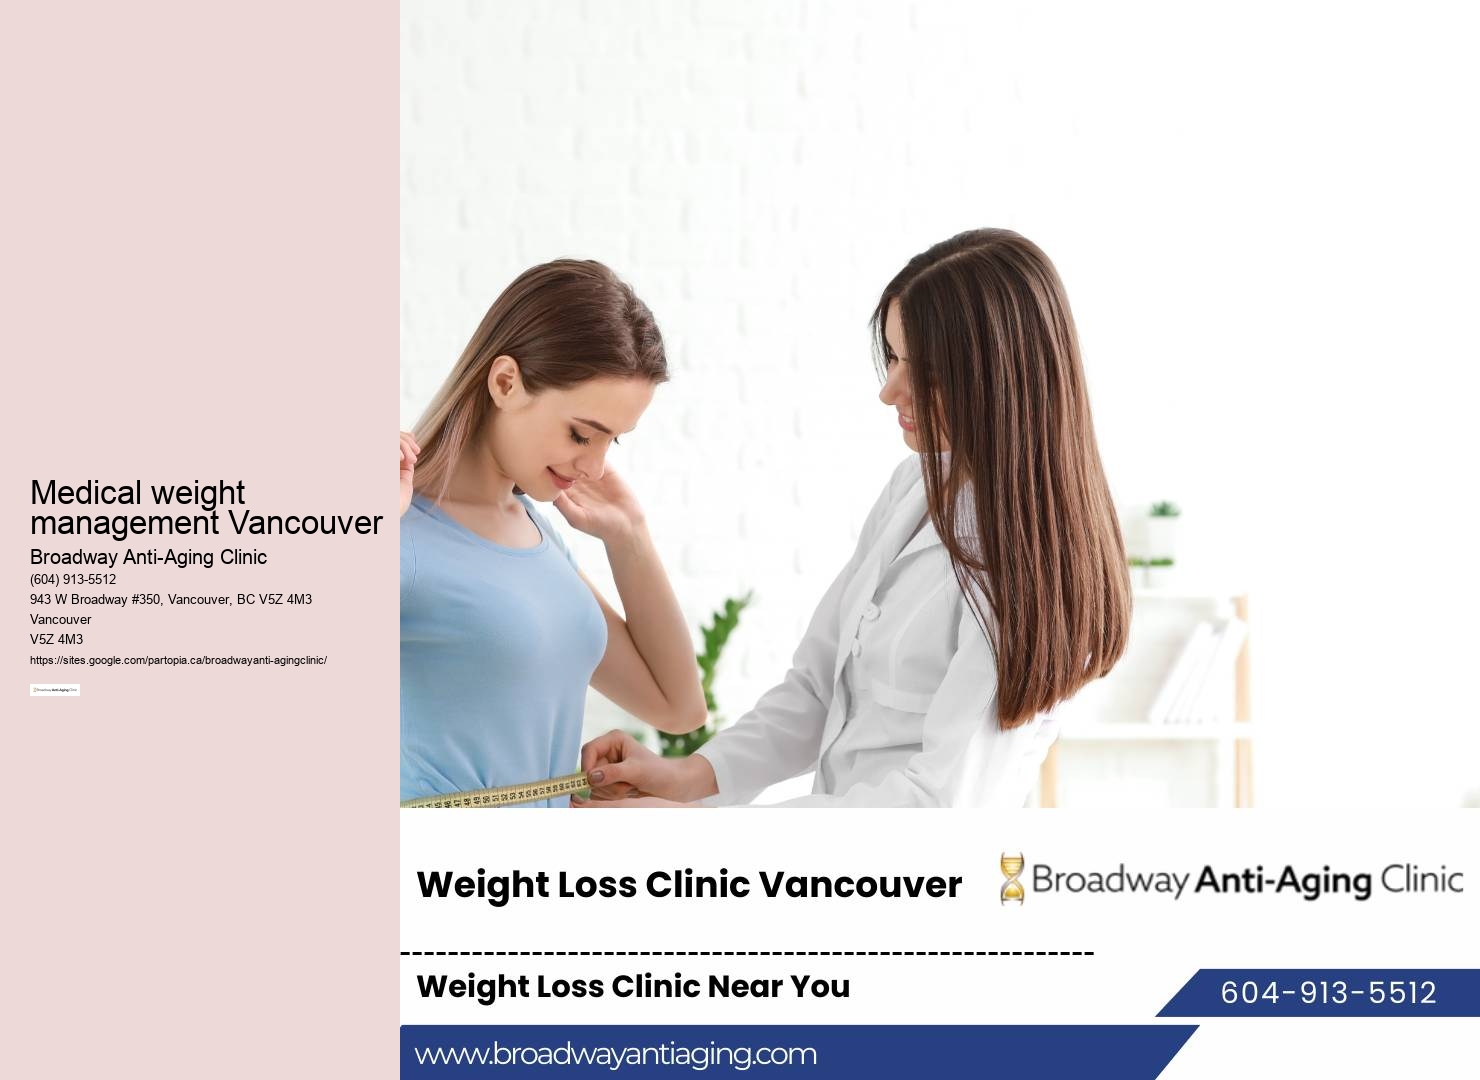 Medical weight management Vancouver